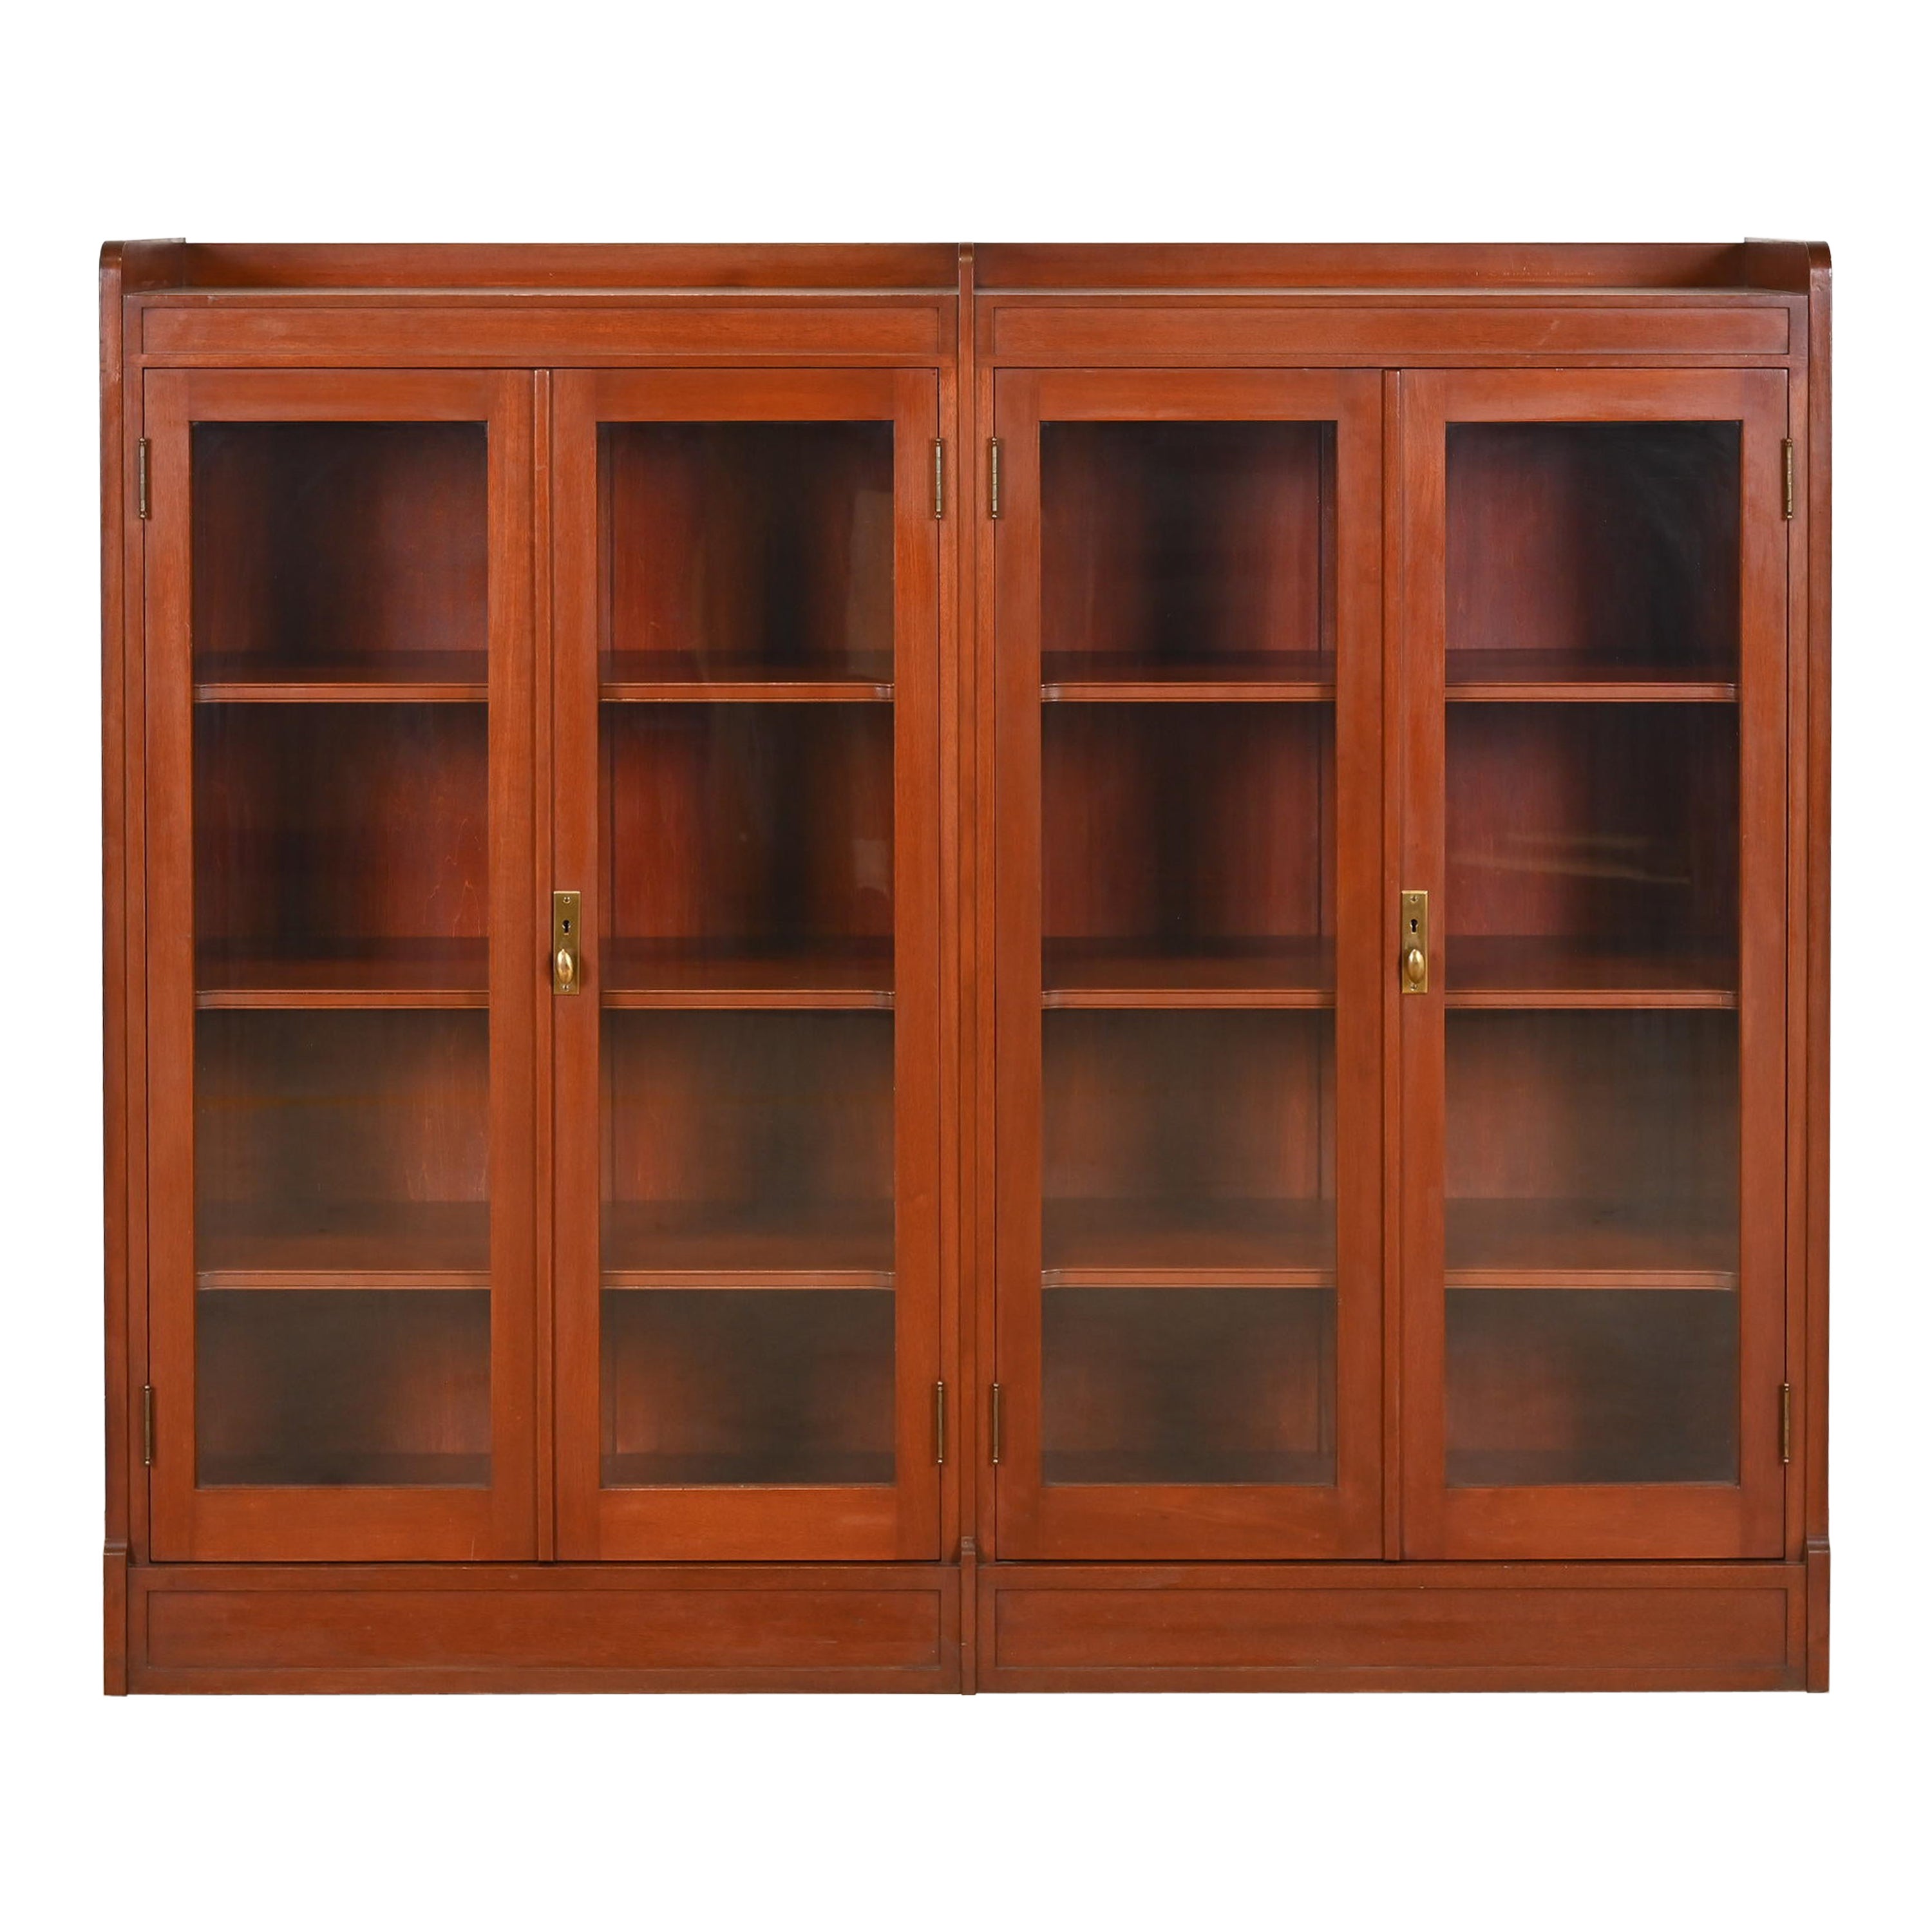 Antique Arts and Crafts Solid Mahogany Double Bookcase, Circa 1920s For Sale